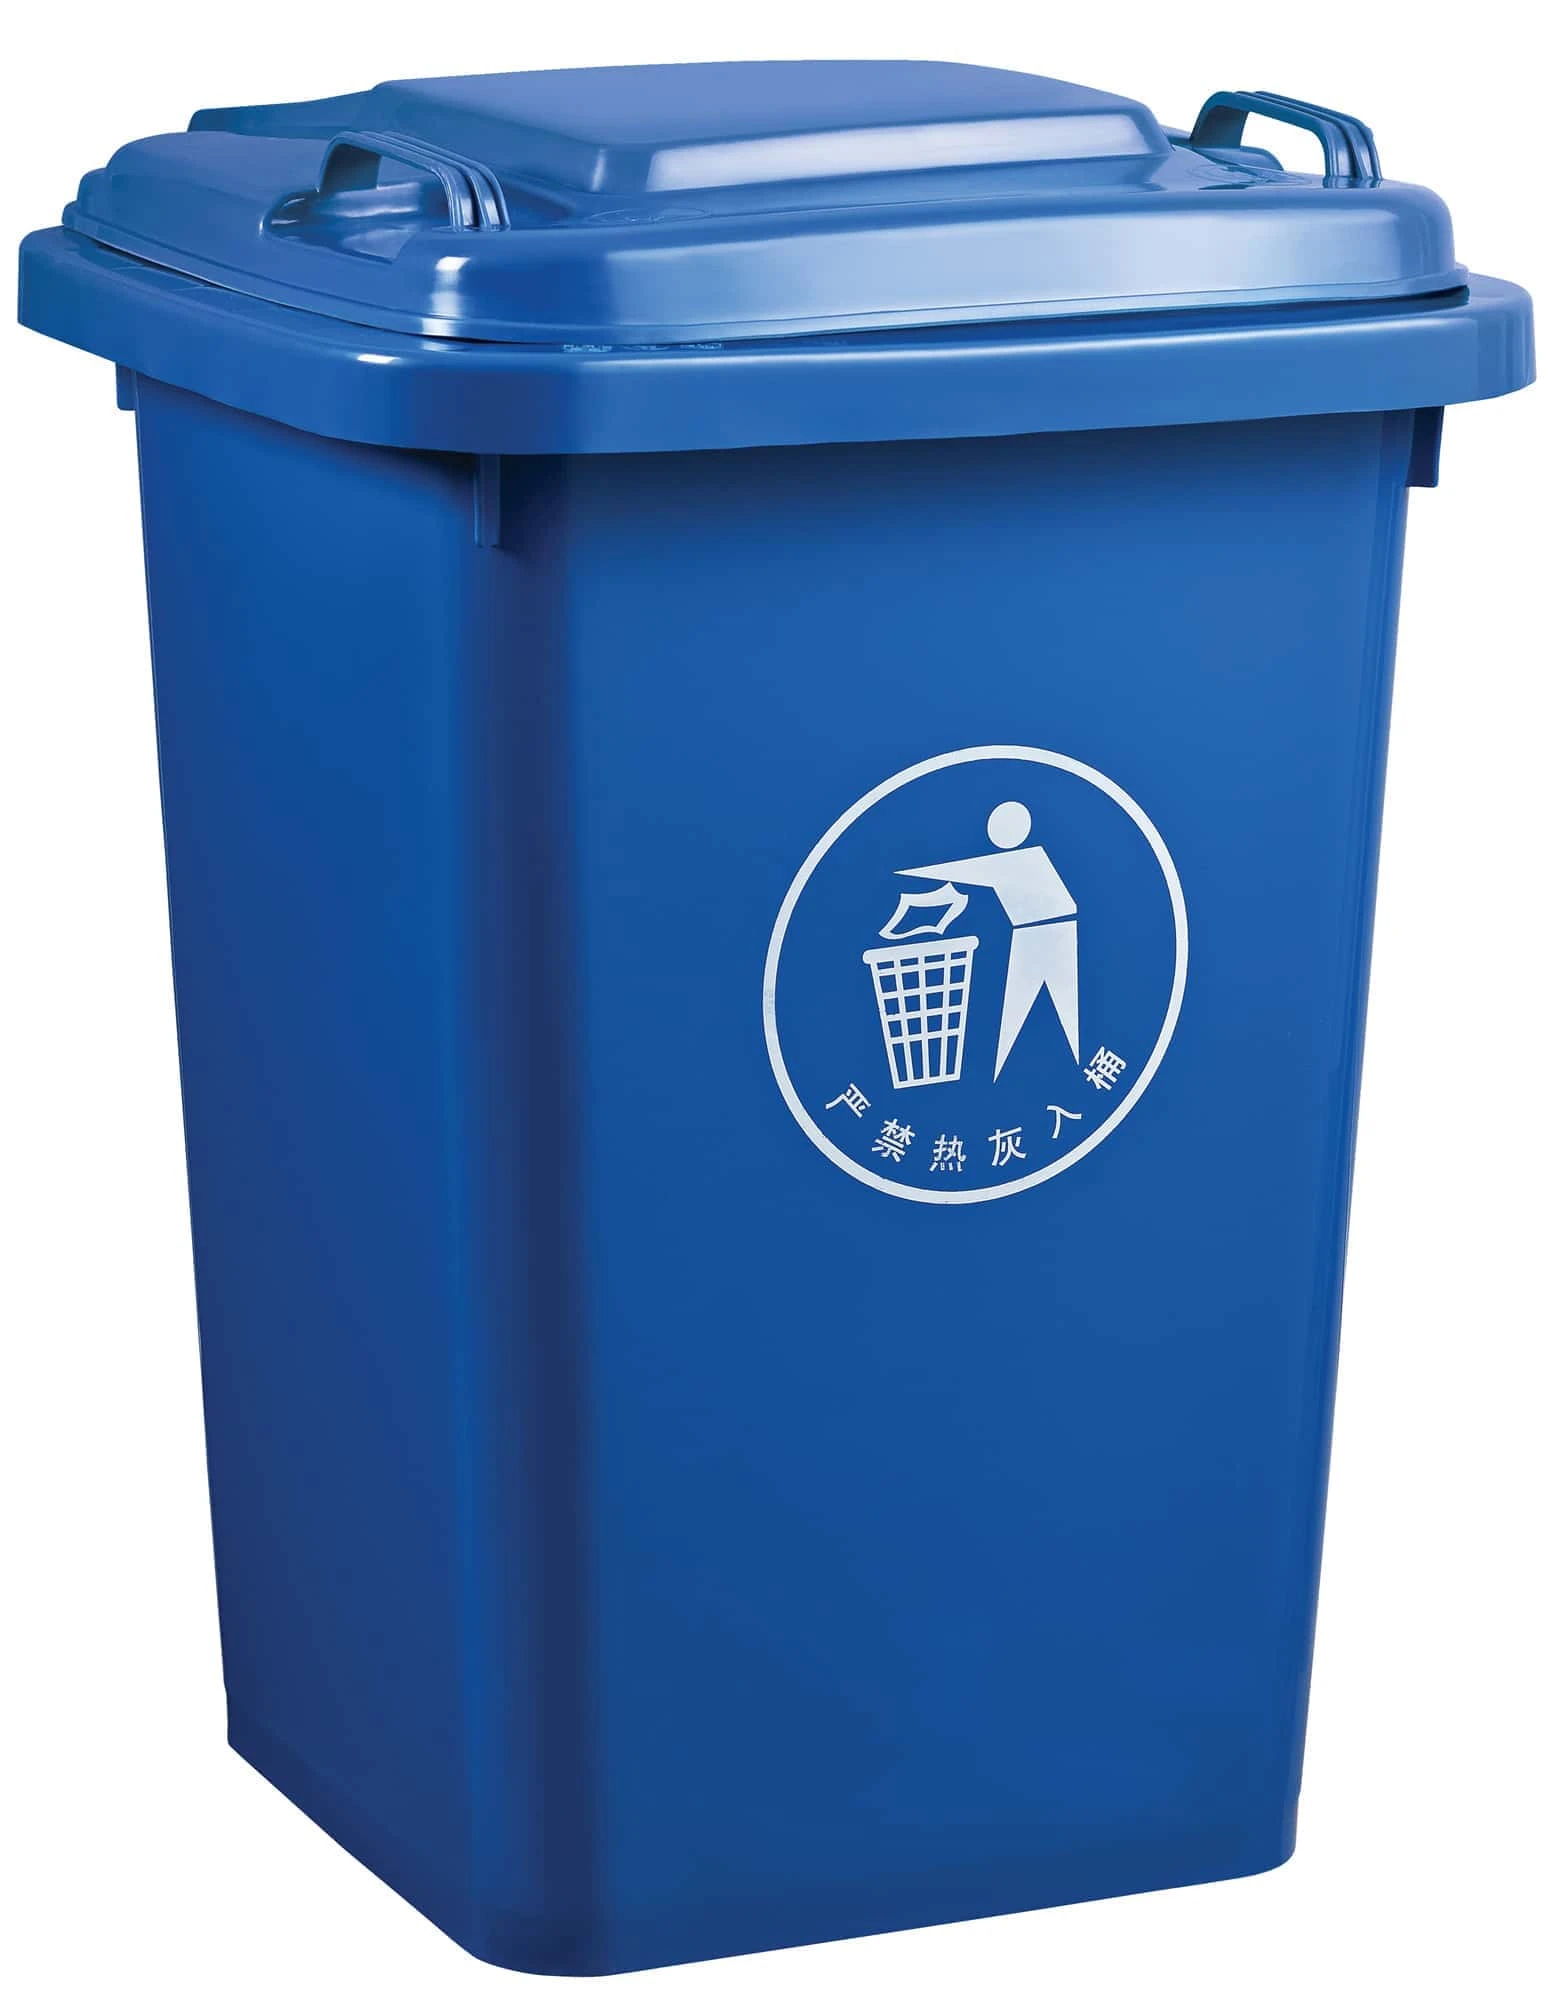 50 liter plastic dustbin 4 universal wheels mobile waste container garbage container trash can